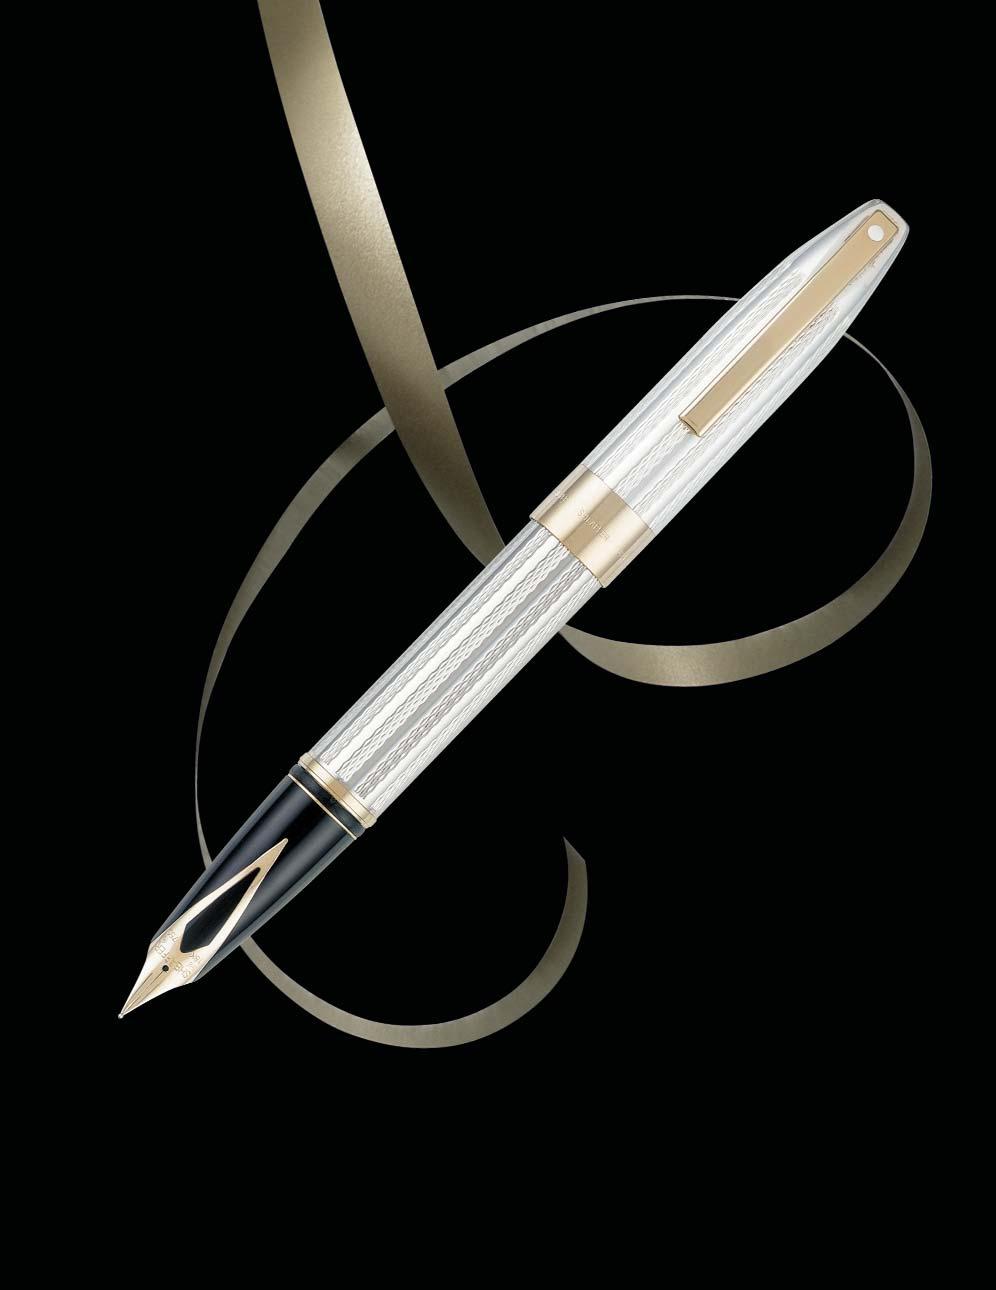 9037 9045 Timeless Classic The Sheaffer Legacy Heritage Sterling Silver Collection features a wide profile and a classic interrupted